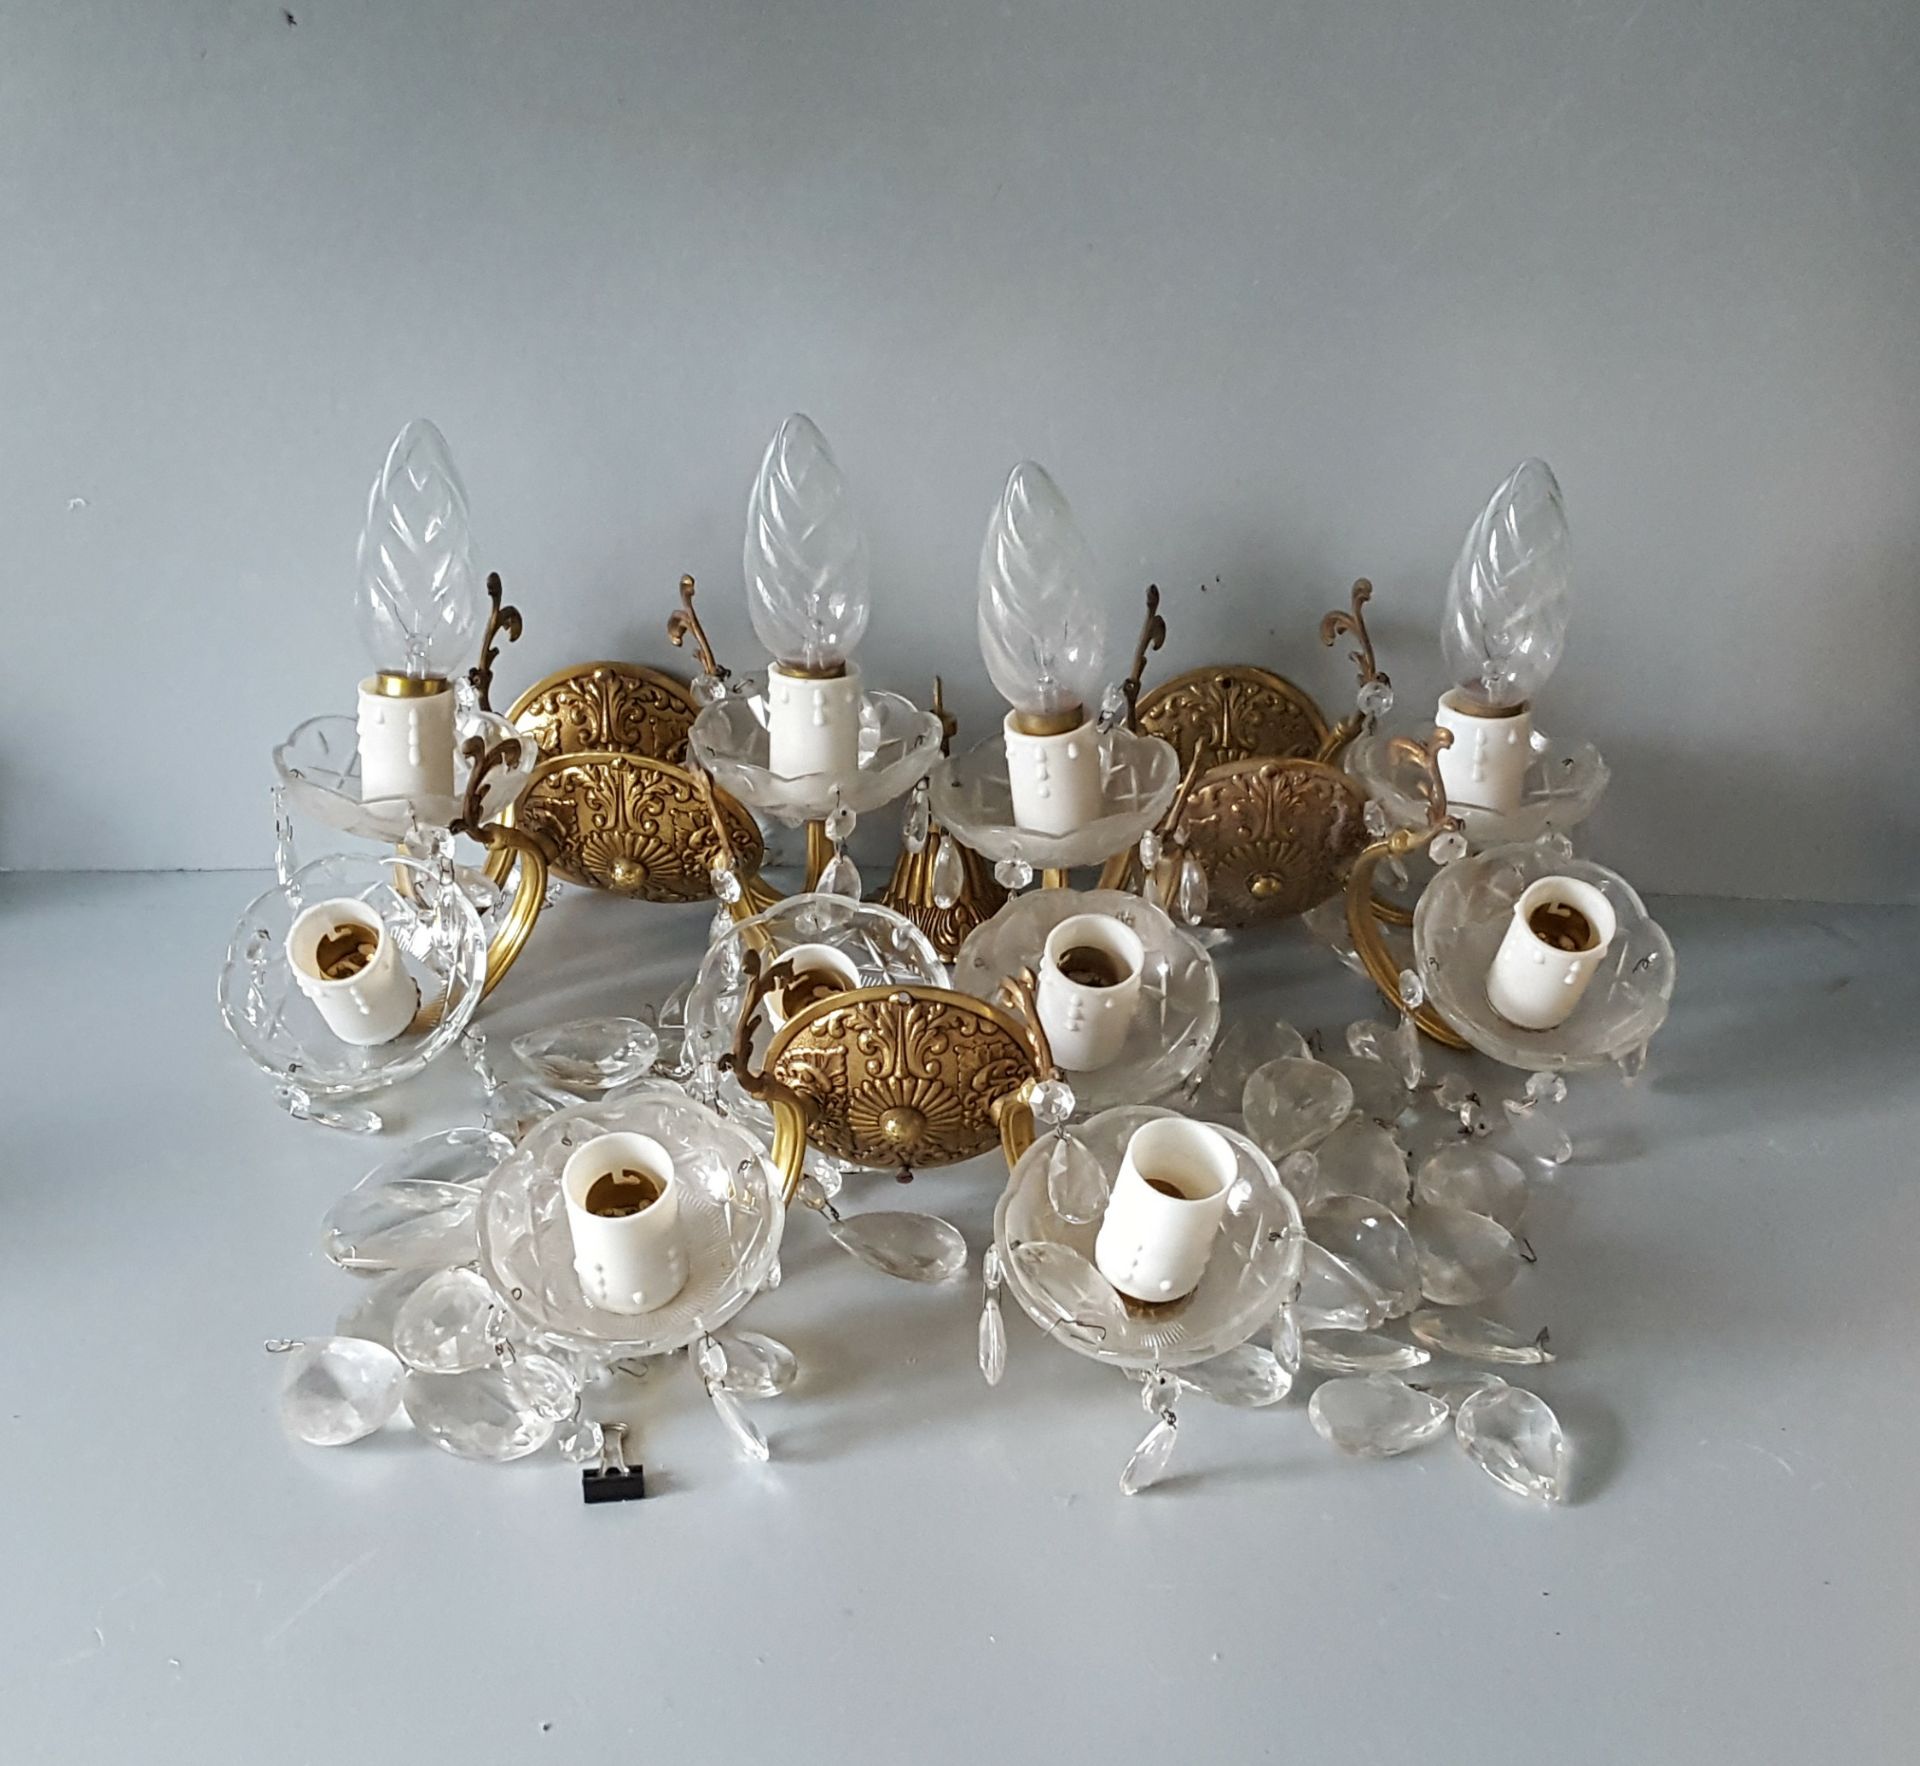 Vintage Retro 3 Chandeliers Gold Coloured Metal With 5 Wall Lights - Image 5 of 5